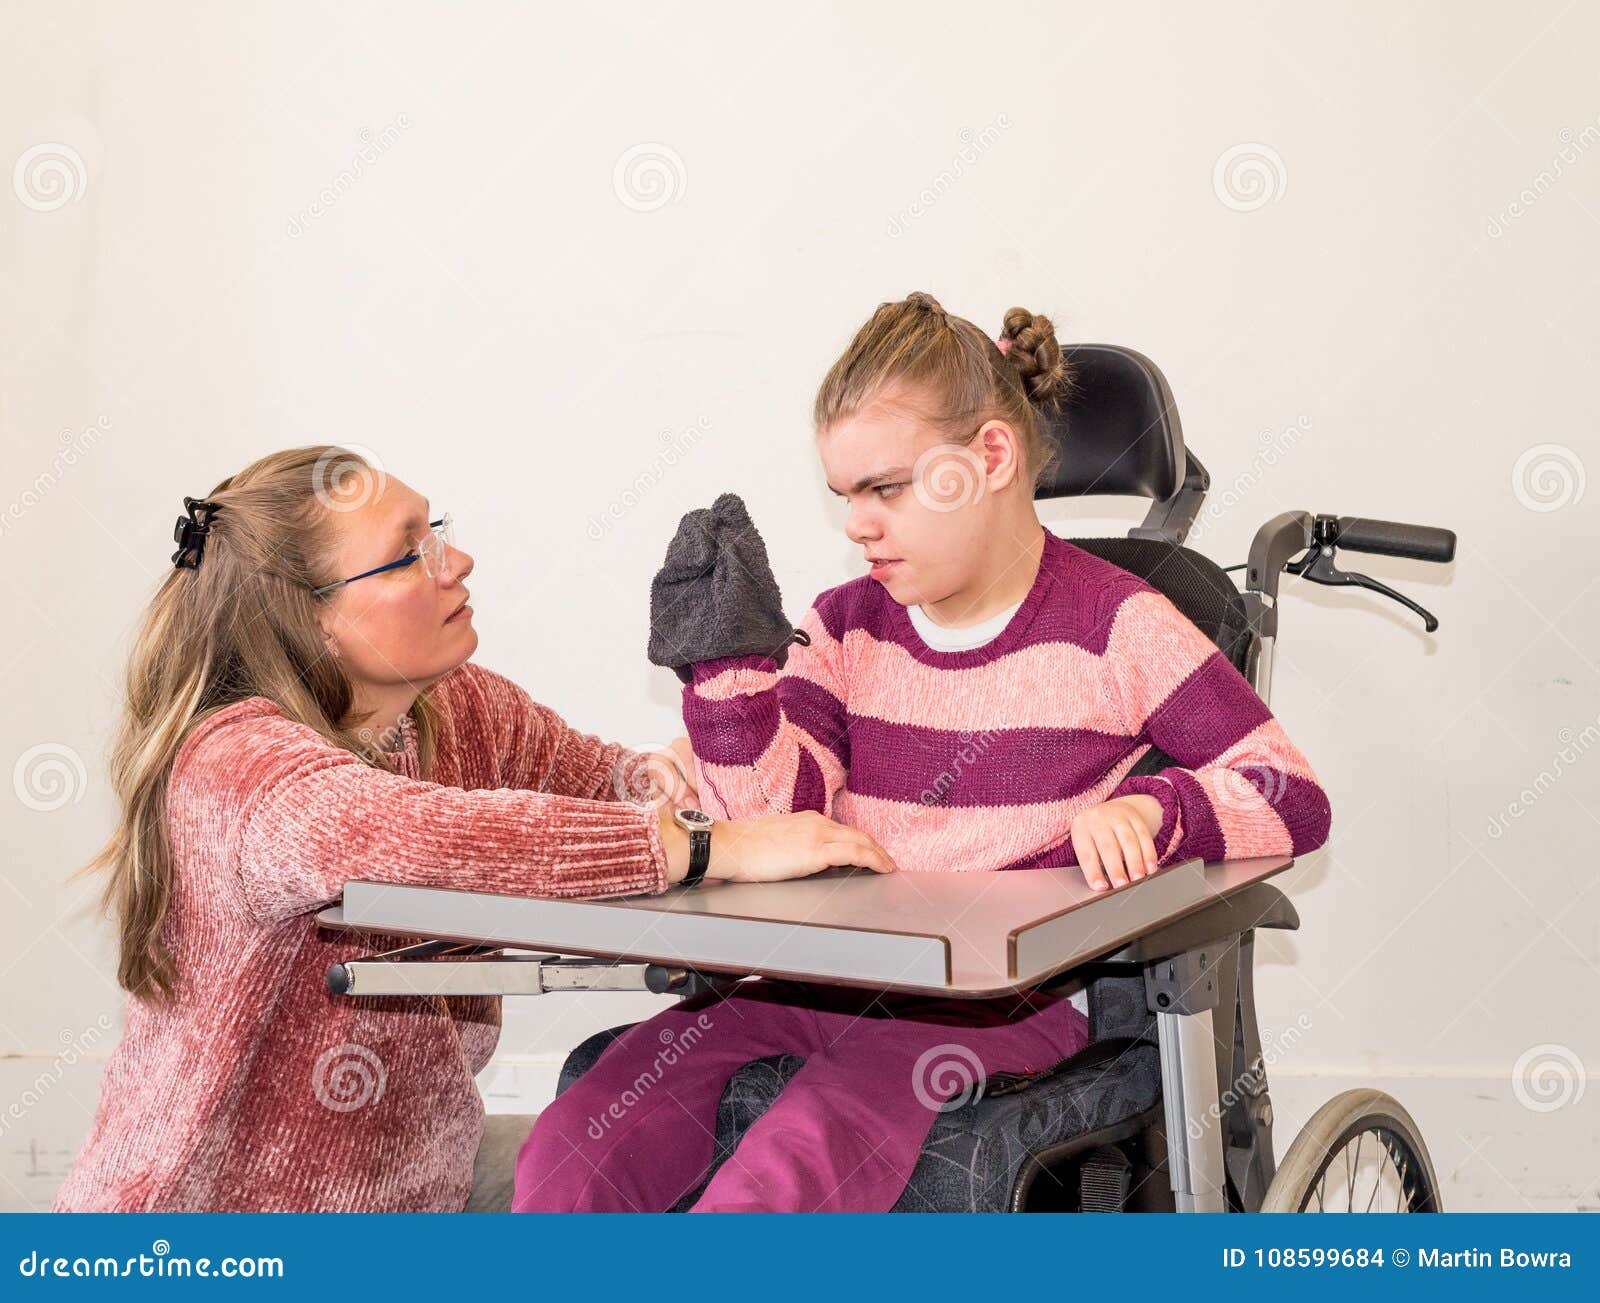 a disabled child in a wheelchair together with a voluntary care worker